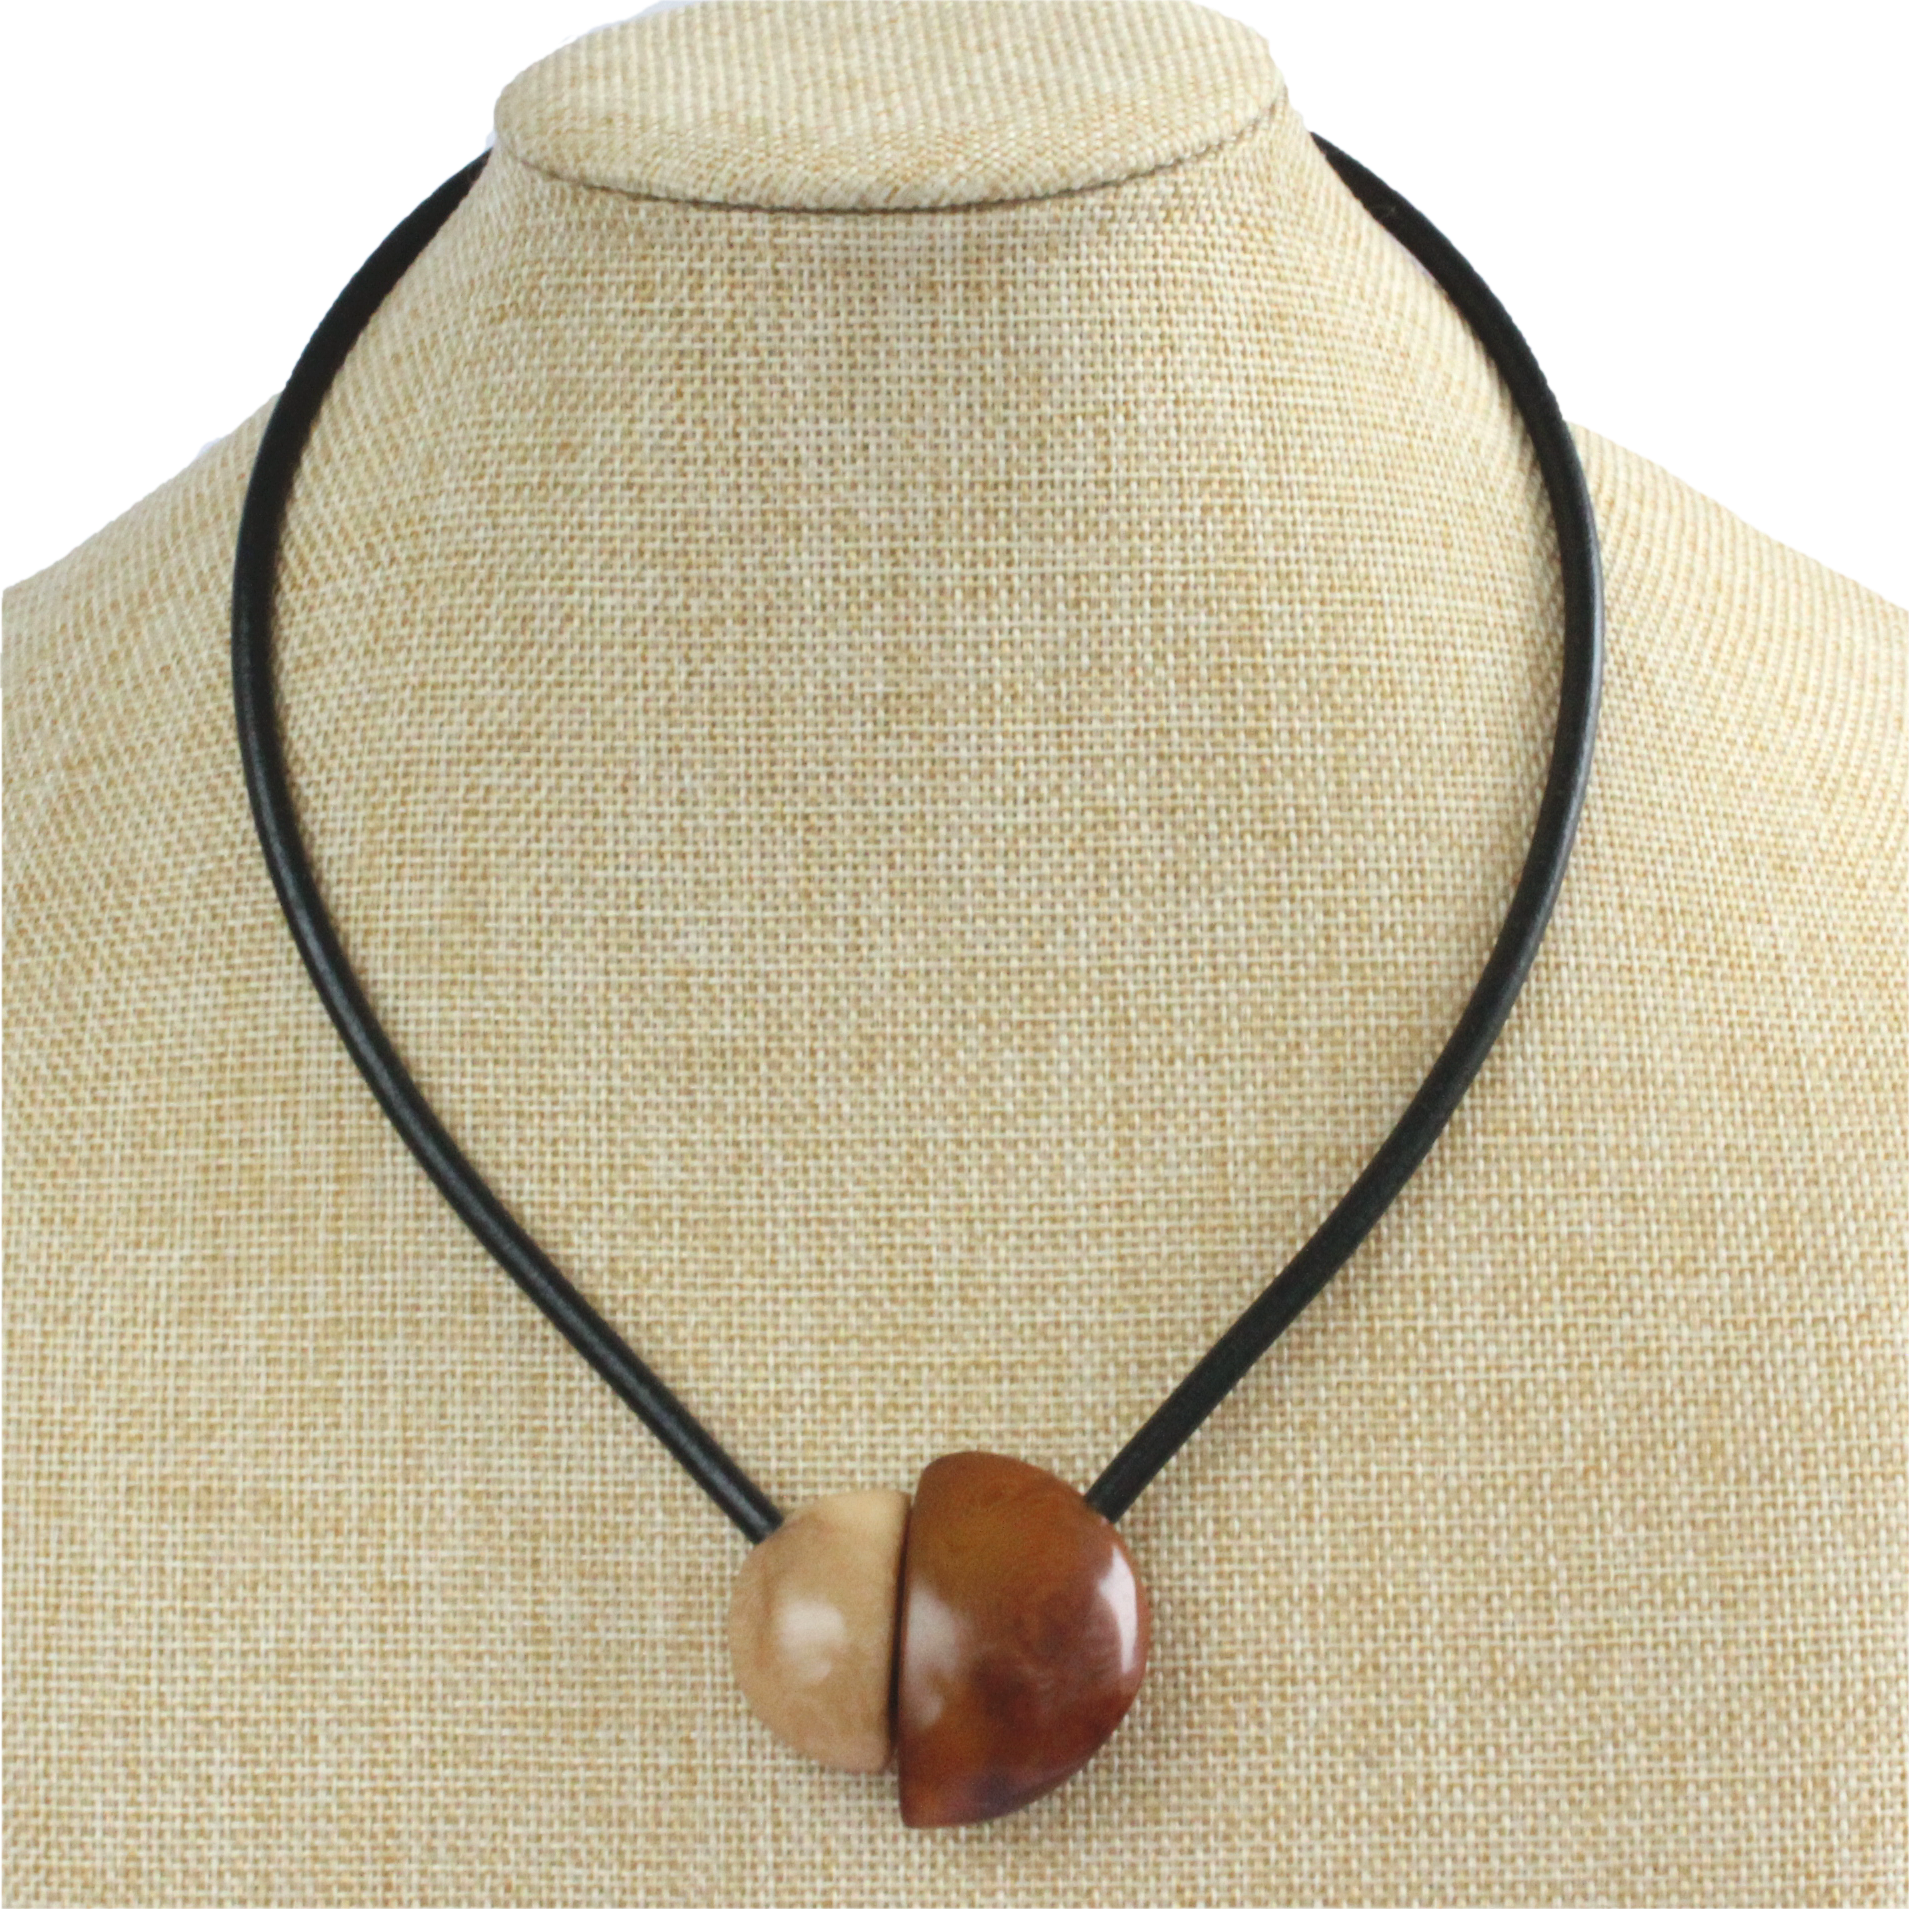 Handmade necklace, tagua nut, brown beige, stand, magnetic